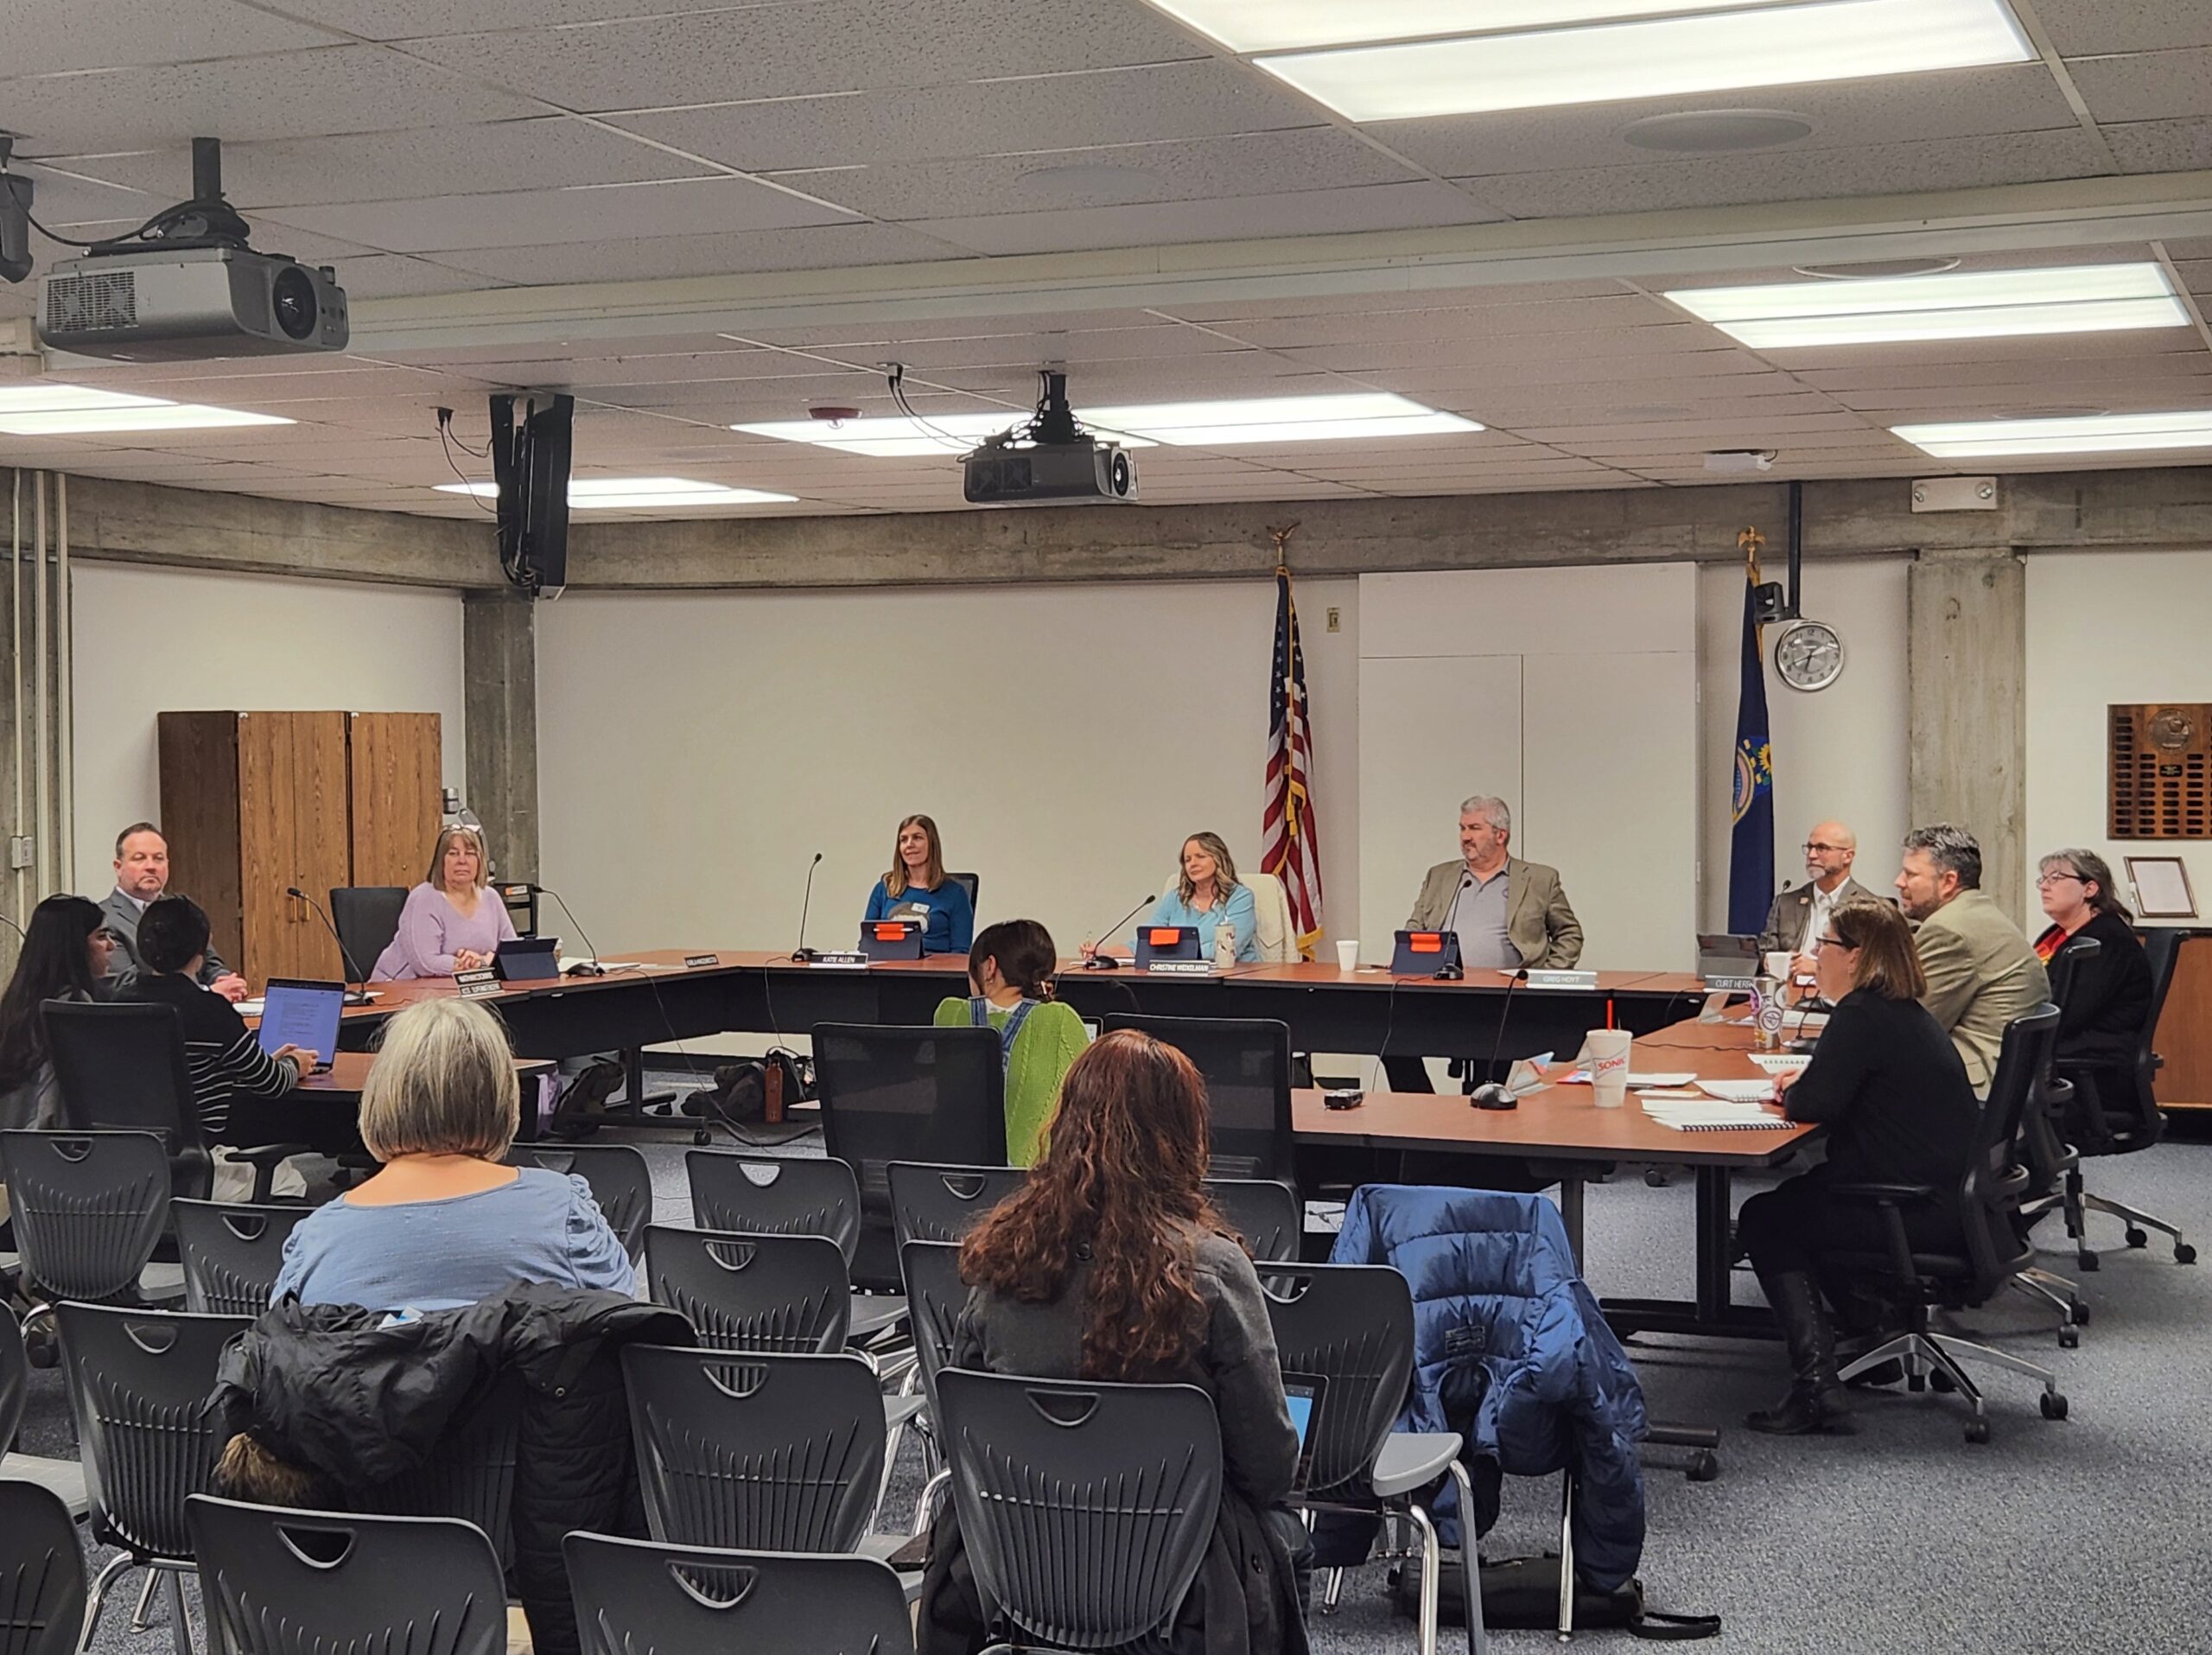 School district USD 383 approves purchase of new iPads for classroom technology use